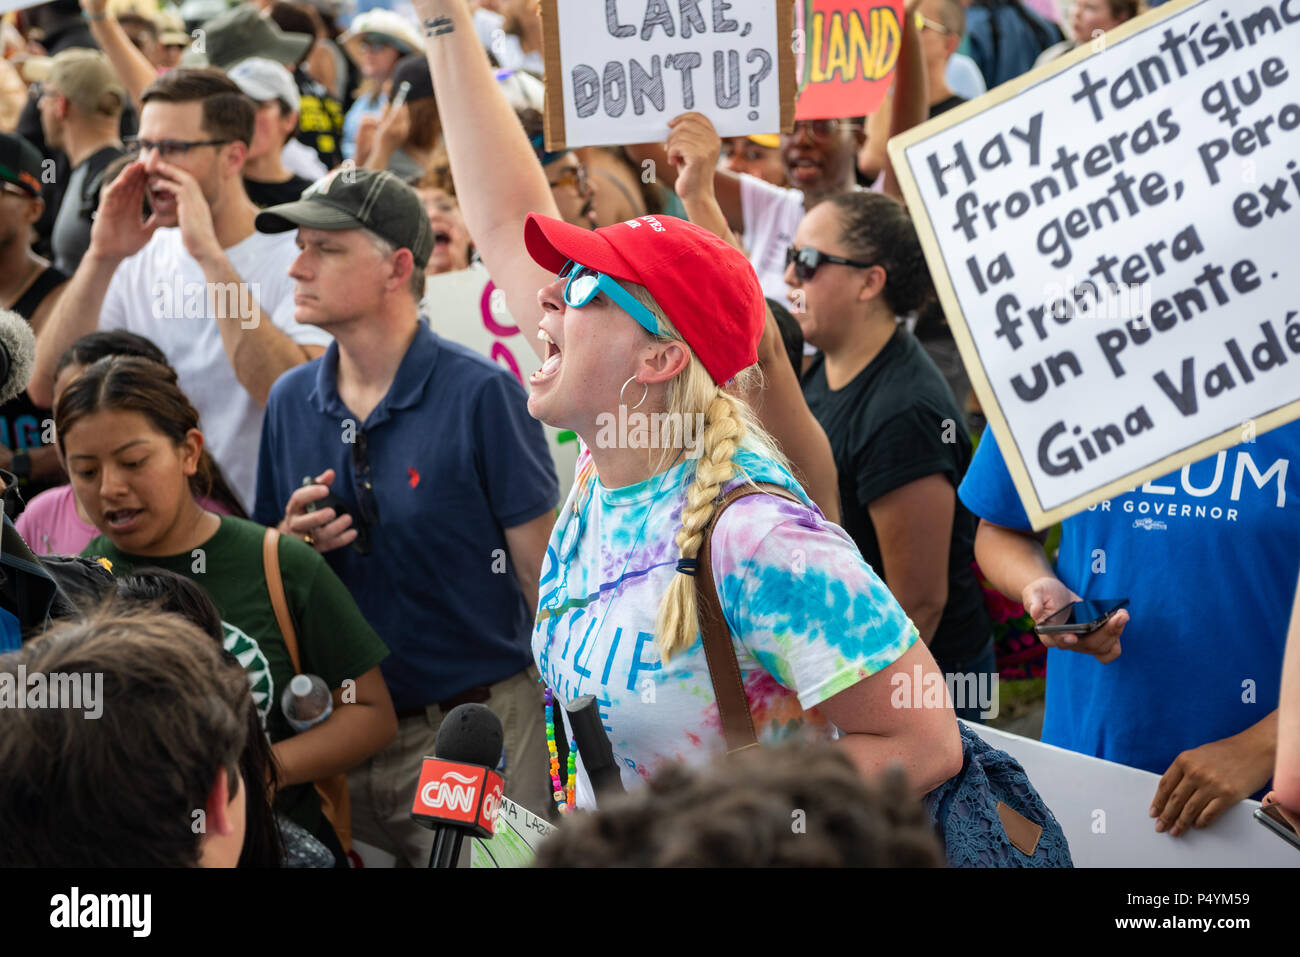 Miami, USA. 23rd June 2018. Marchers outside Homestead Temporary Shelter for Unaccompanied Children protesting against Trumps family separation policy. William C. Bunce/Alamy Live News Stock Photo